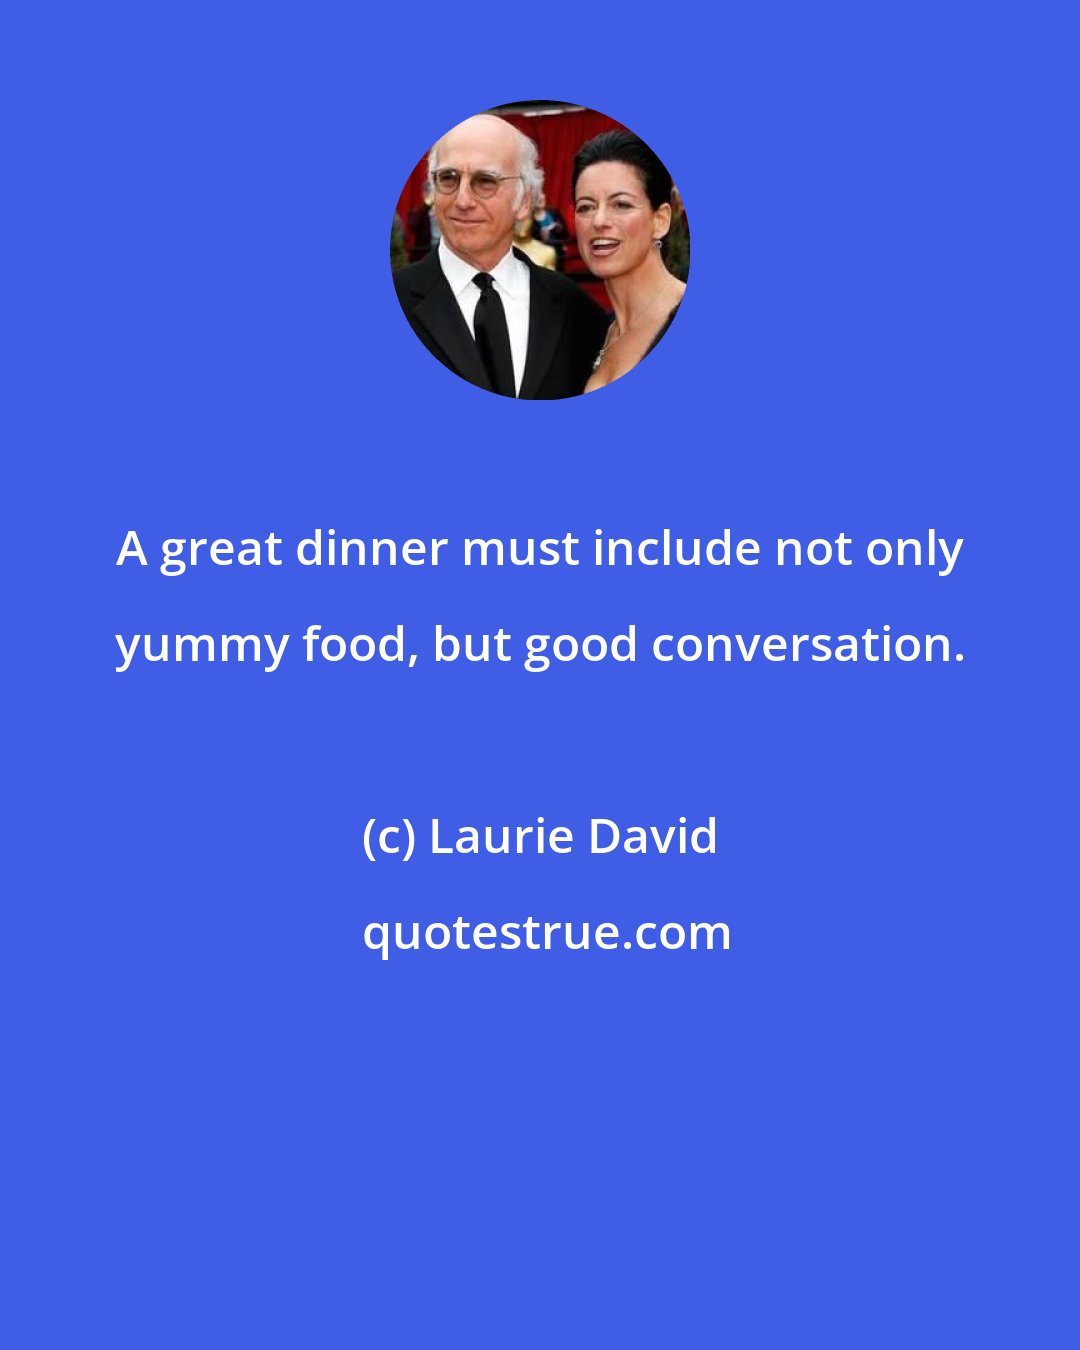 Laurie David: A great dinner must include not only yummy food, but good conversation.